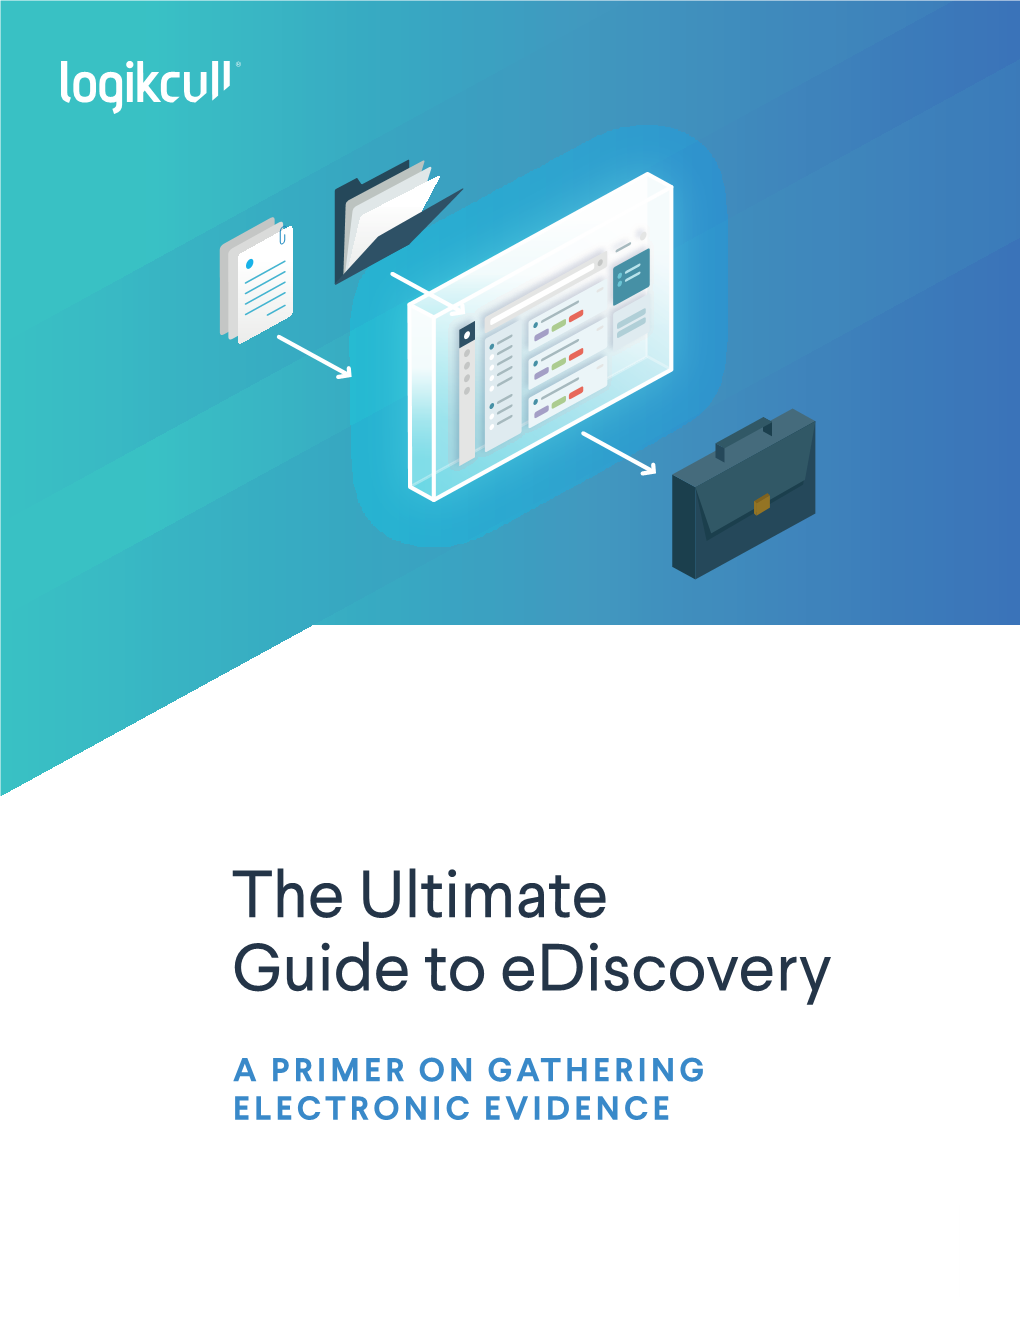 The Ultimate Guide to Ediscovery